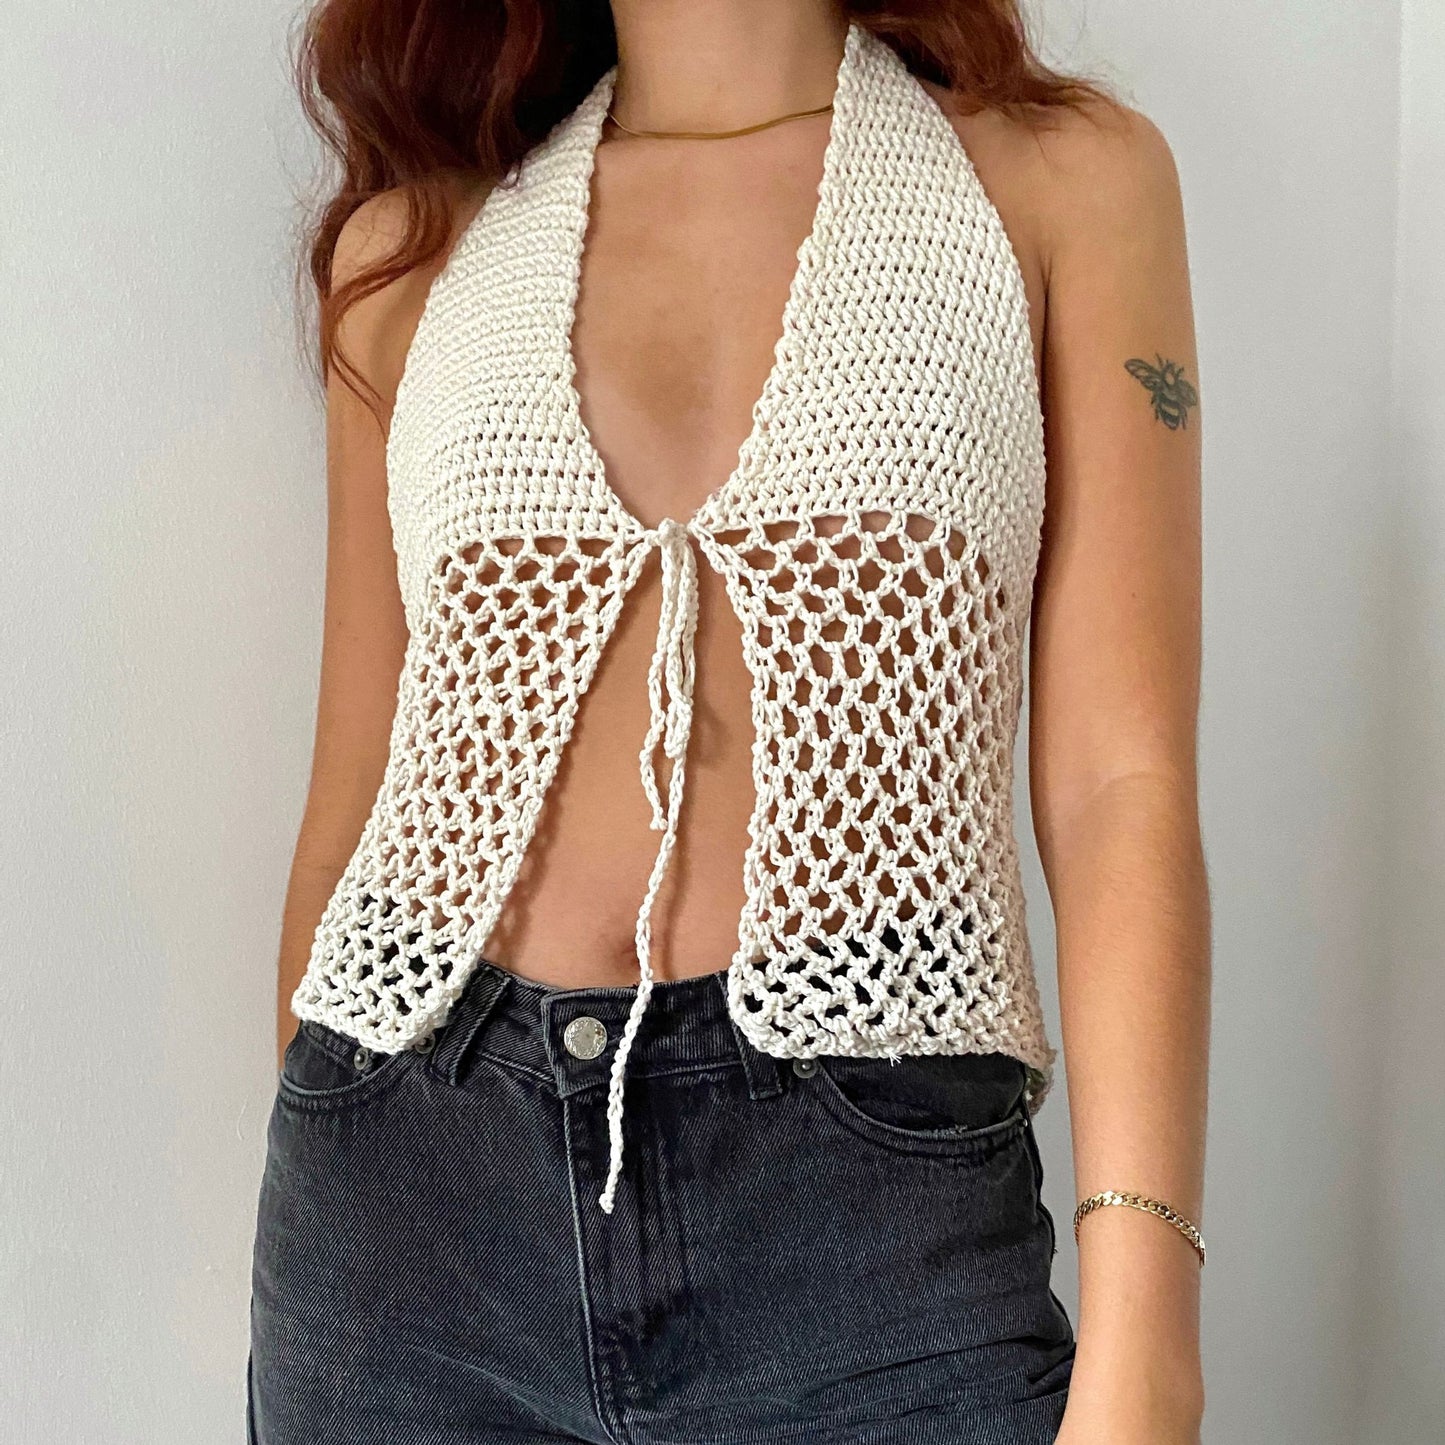 Girl posing in a white halter neck crochet top with see-through mesh panels and a bow in the front